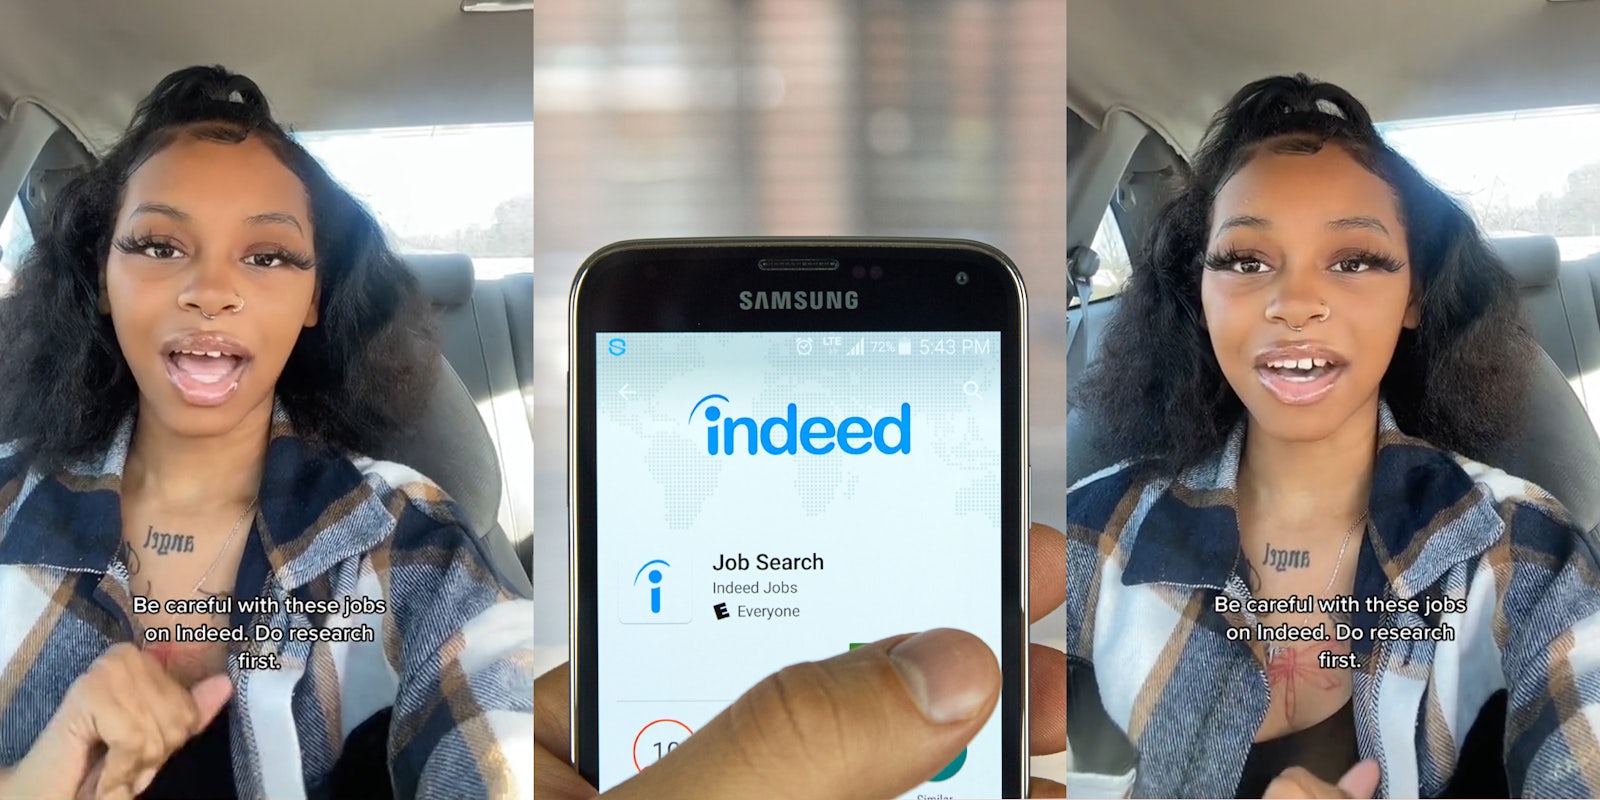 woman speaking in car with caption 'Be careful with these jobs on Indeed. Do research first.' (l) woman holding phone with Indeed on screen in front of blurred background (c) woman speaking in car with caption 'Be careful with these jobs on Indeed. Do research first.'